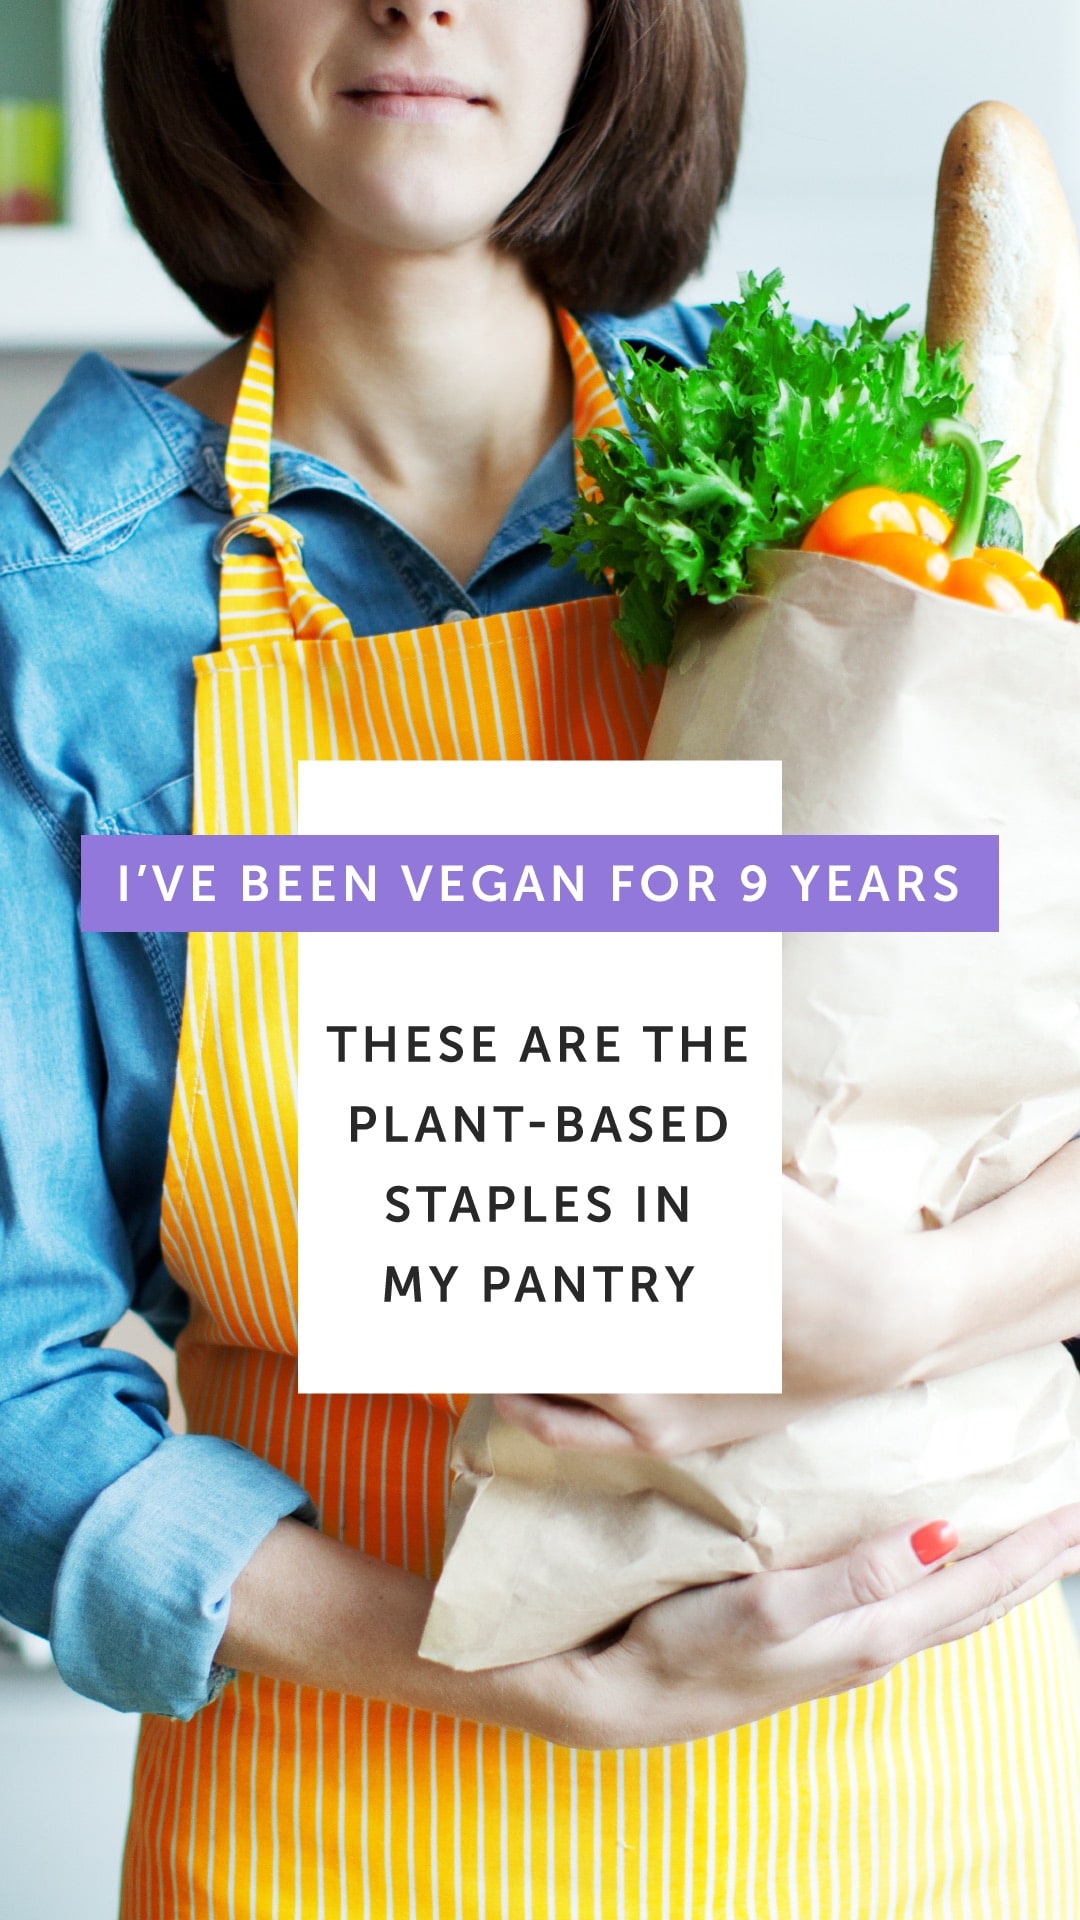 The 6 Plant-Based Staples That Should Be in Everyone’s Pantry